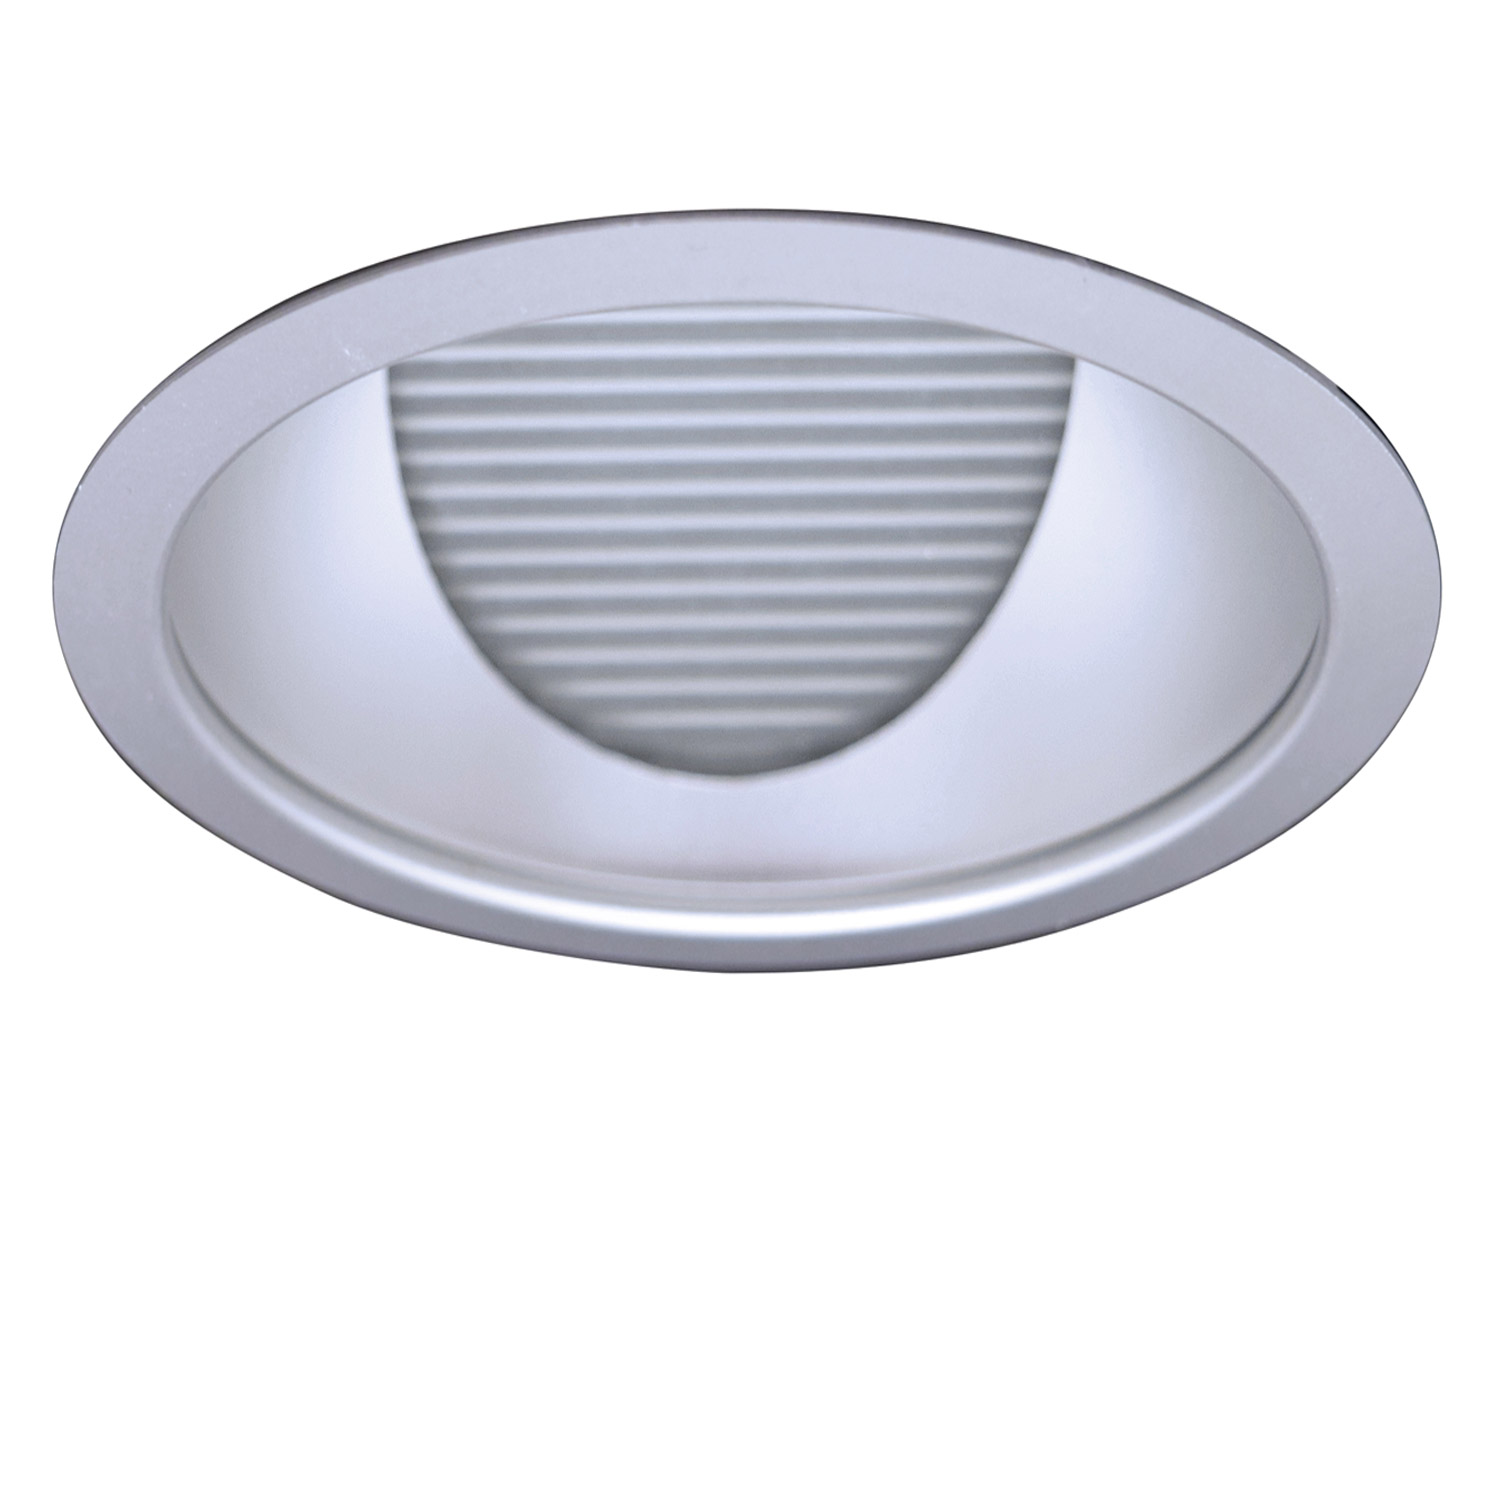 Product image for Trimless Lensed Wall Wash Reflector for 4-Inch BIOS LED Downlights